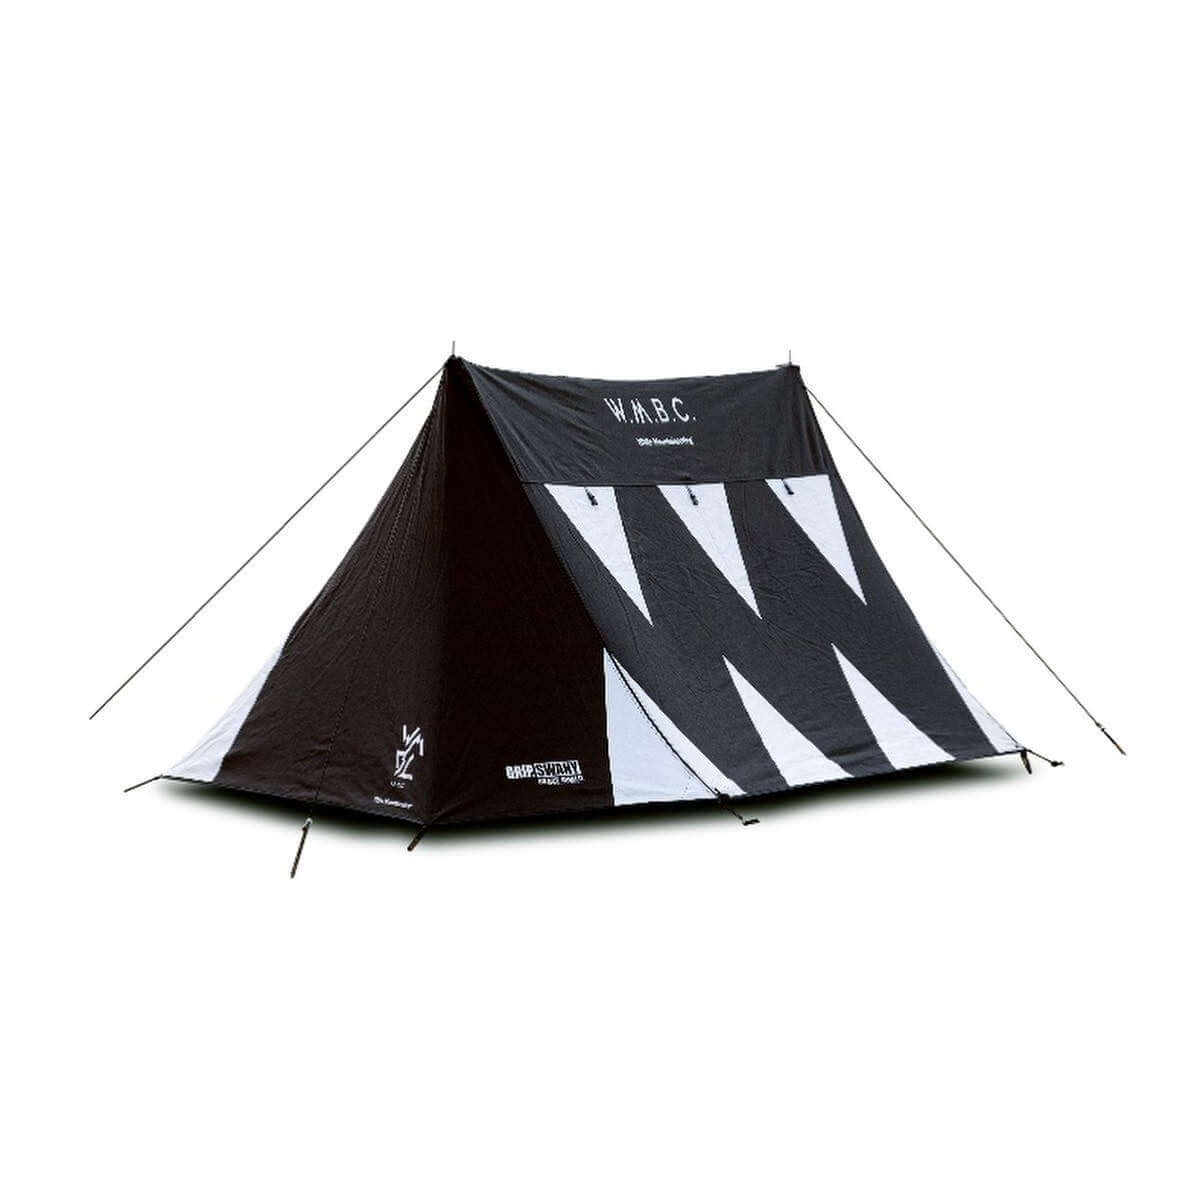 White Mountaineering × GRIP SWANY - FIREPROOF GS TENT / BLACK Collaboration BC2371801